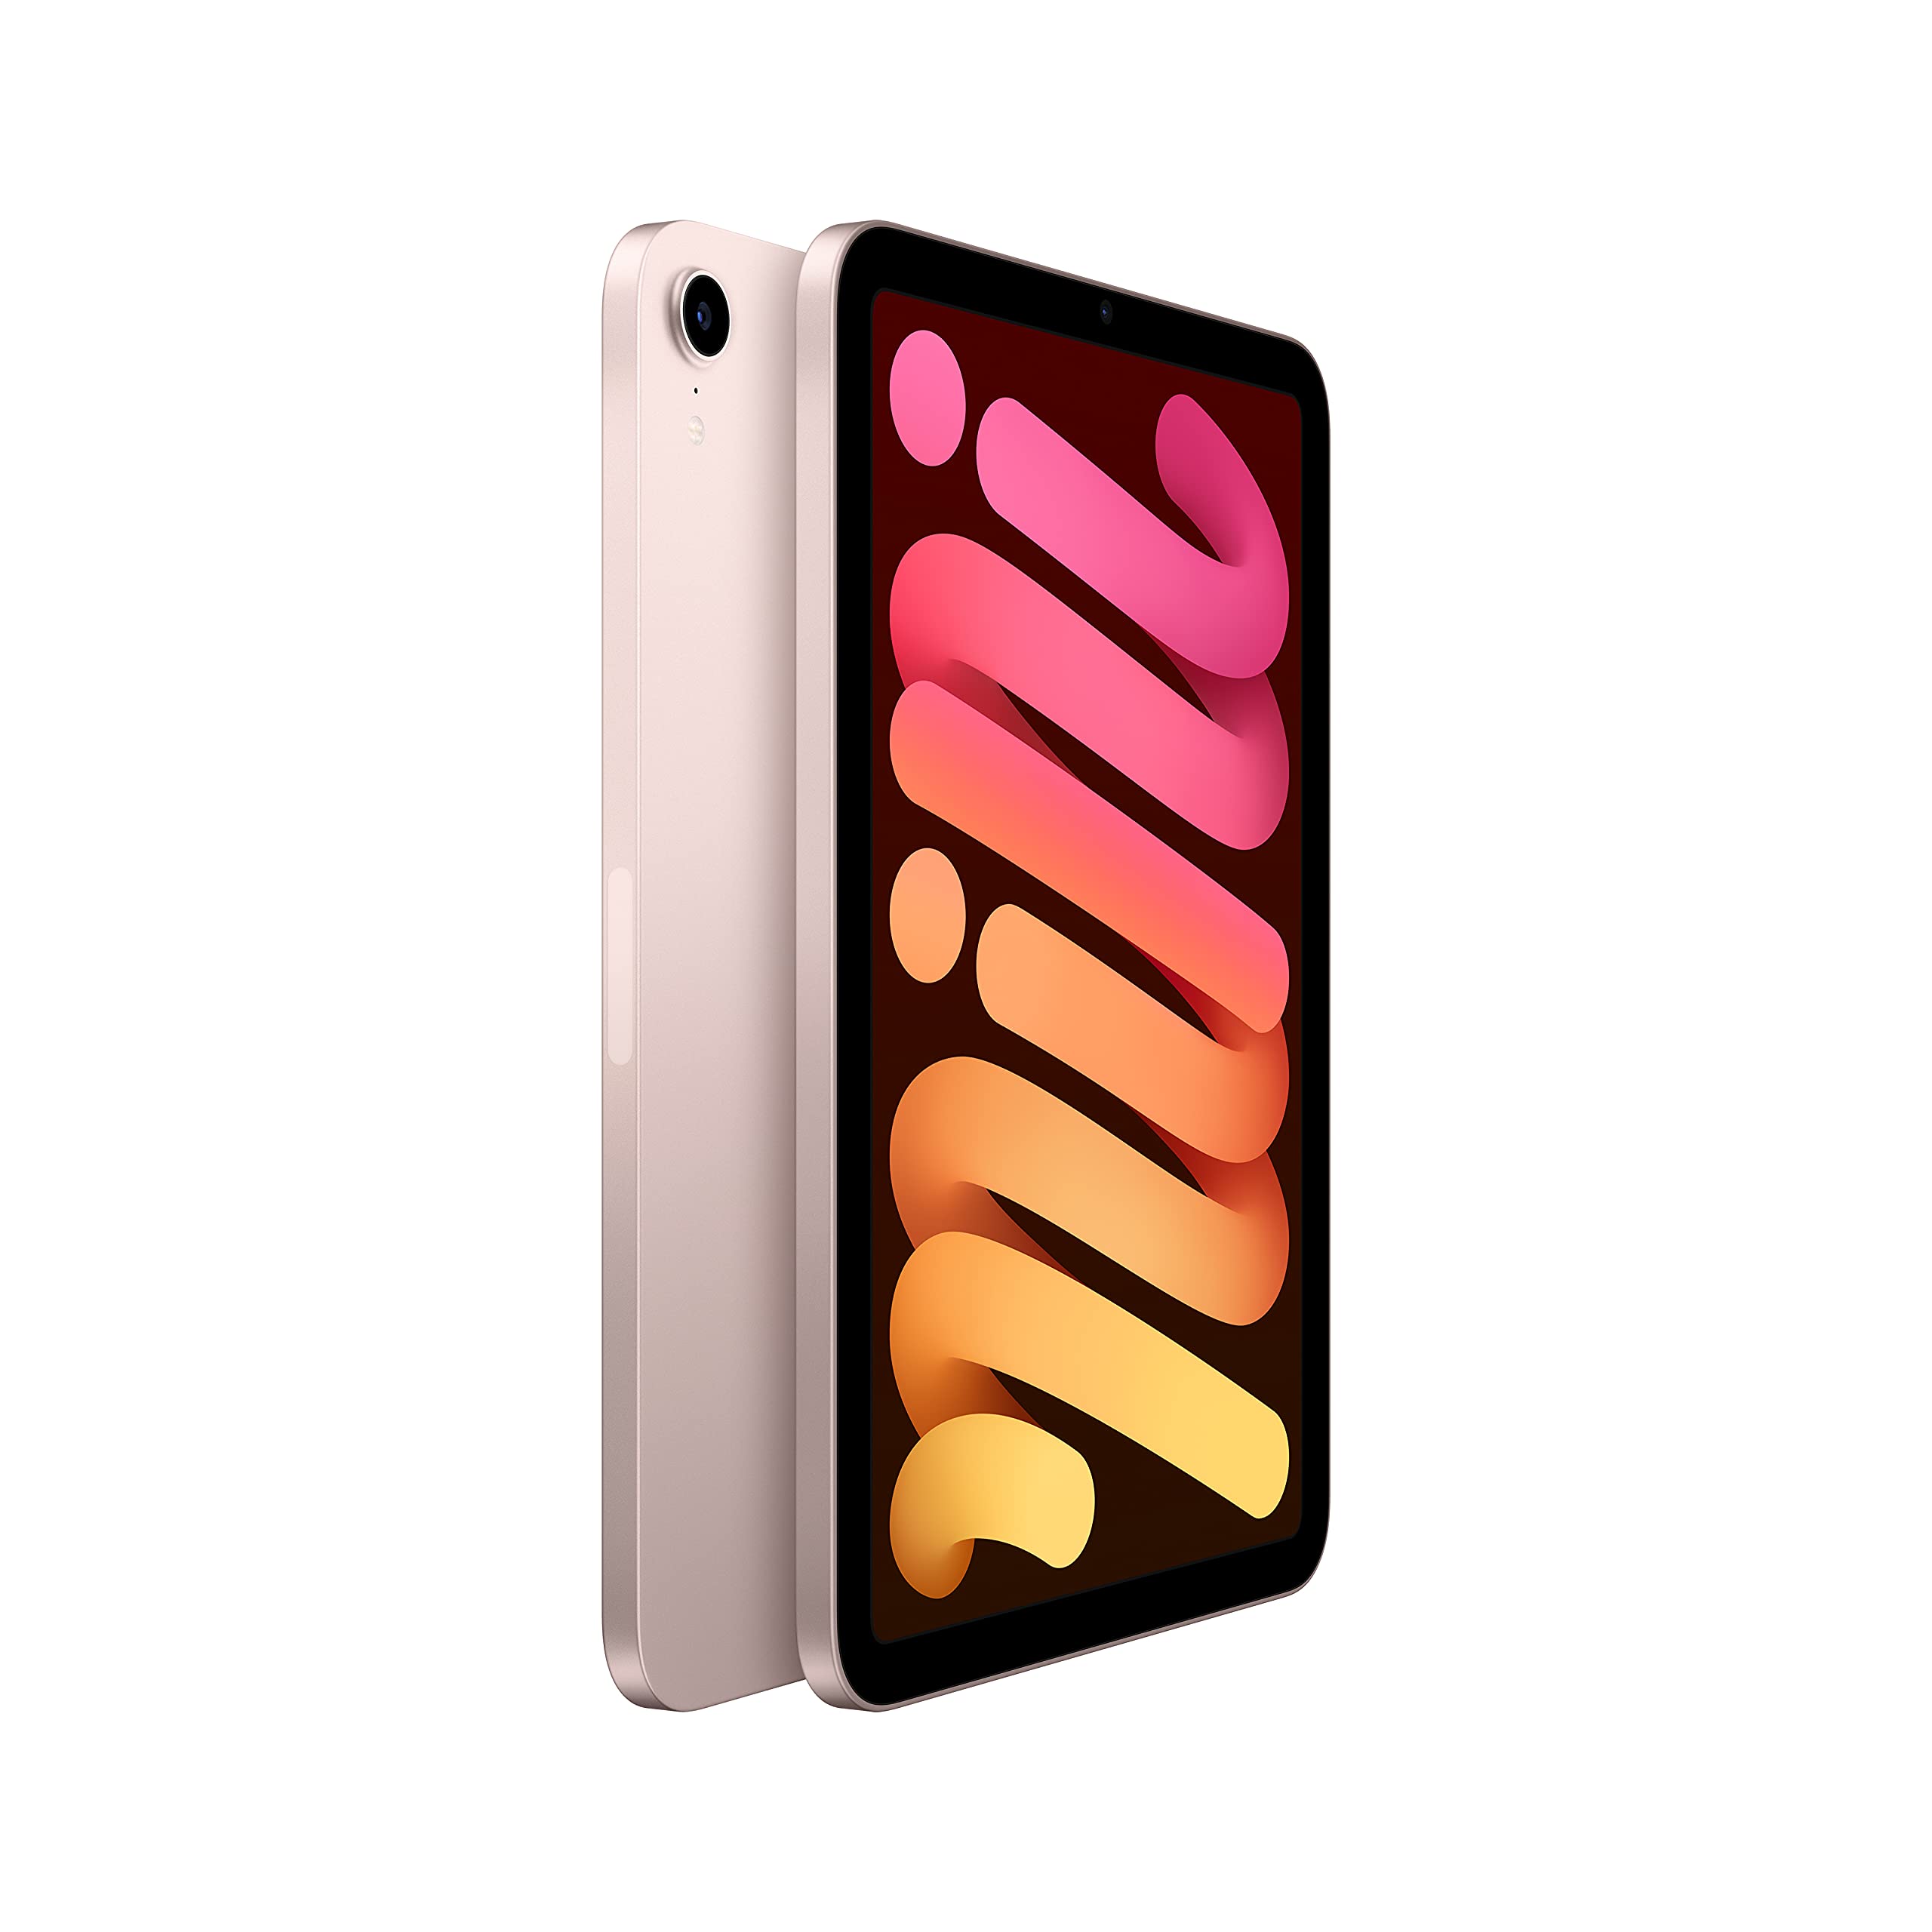 Apple iPad Mini (6th Generation): with A15 Bionic chip, 8.3-inch Liquid Retina Display, 64GB, Wi-Fi 6, 12MP front/12MP Back Camera, Touch ID, All-Day Battery Life – Pink